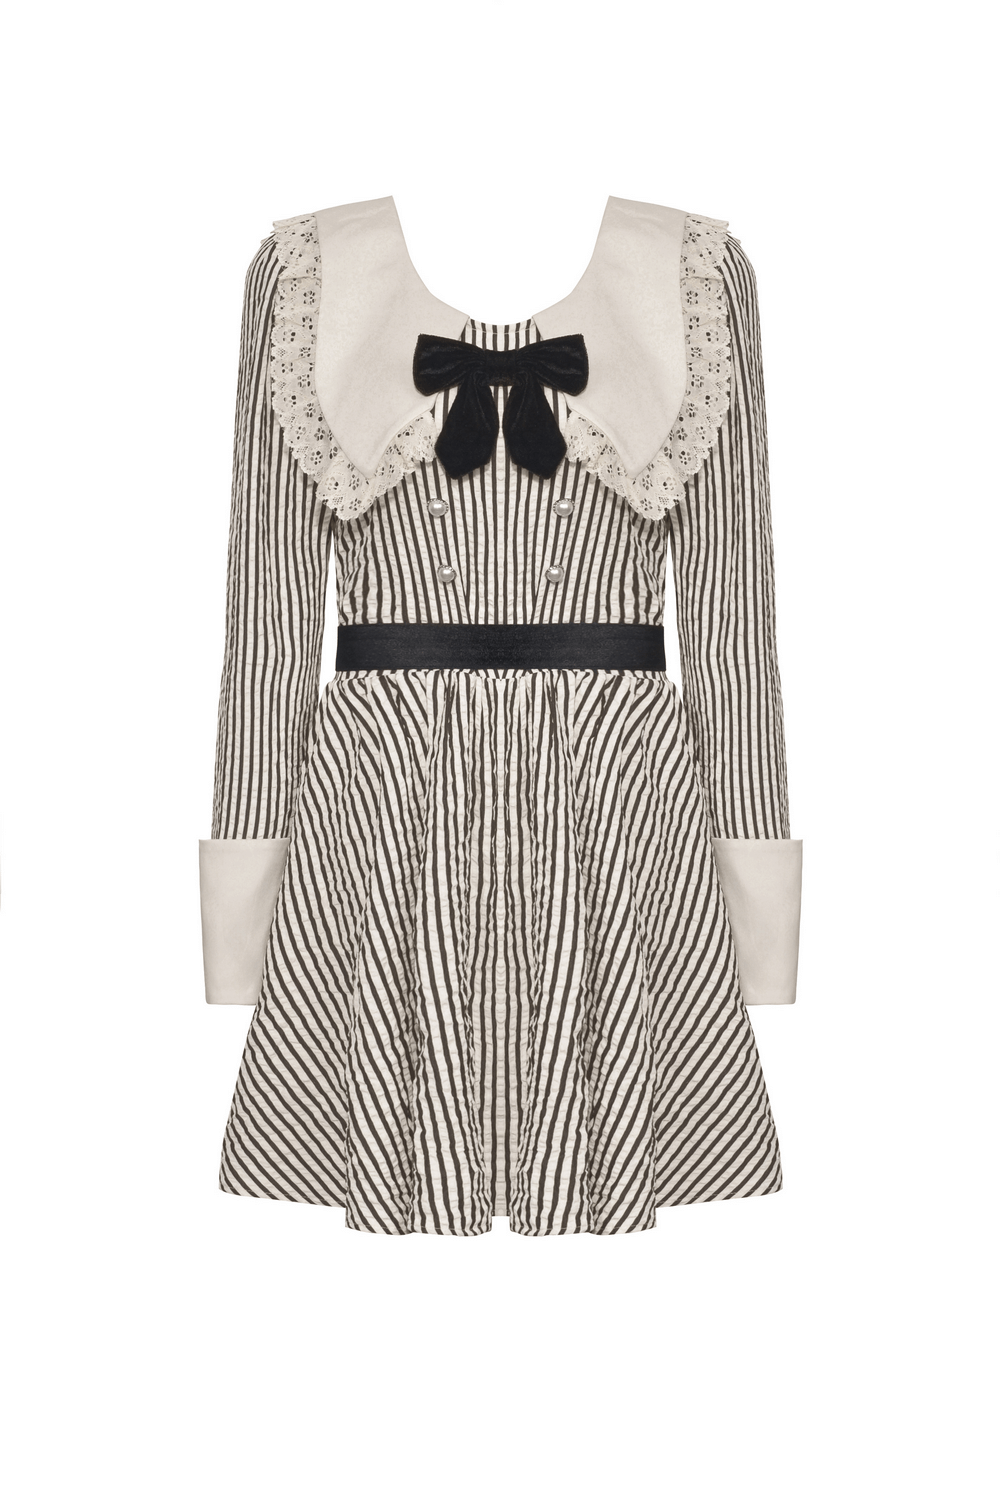 Gothic Victorian Striped Dress with Lace Collar and Cuffs